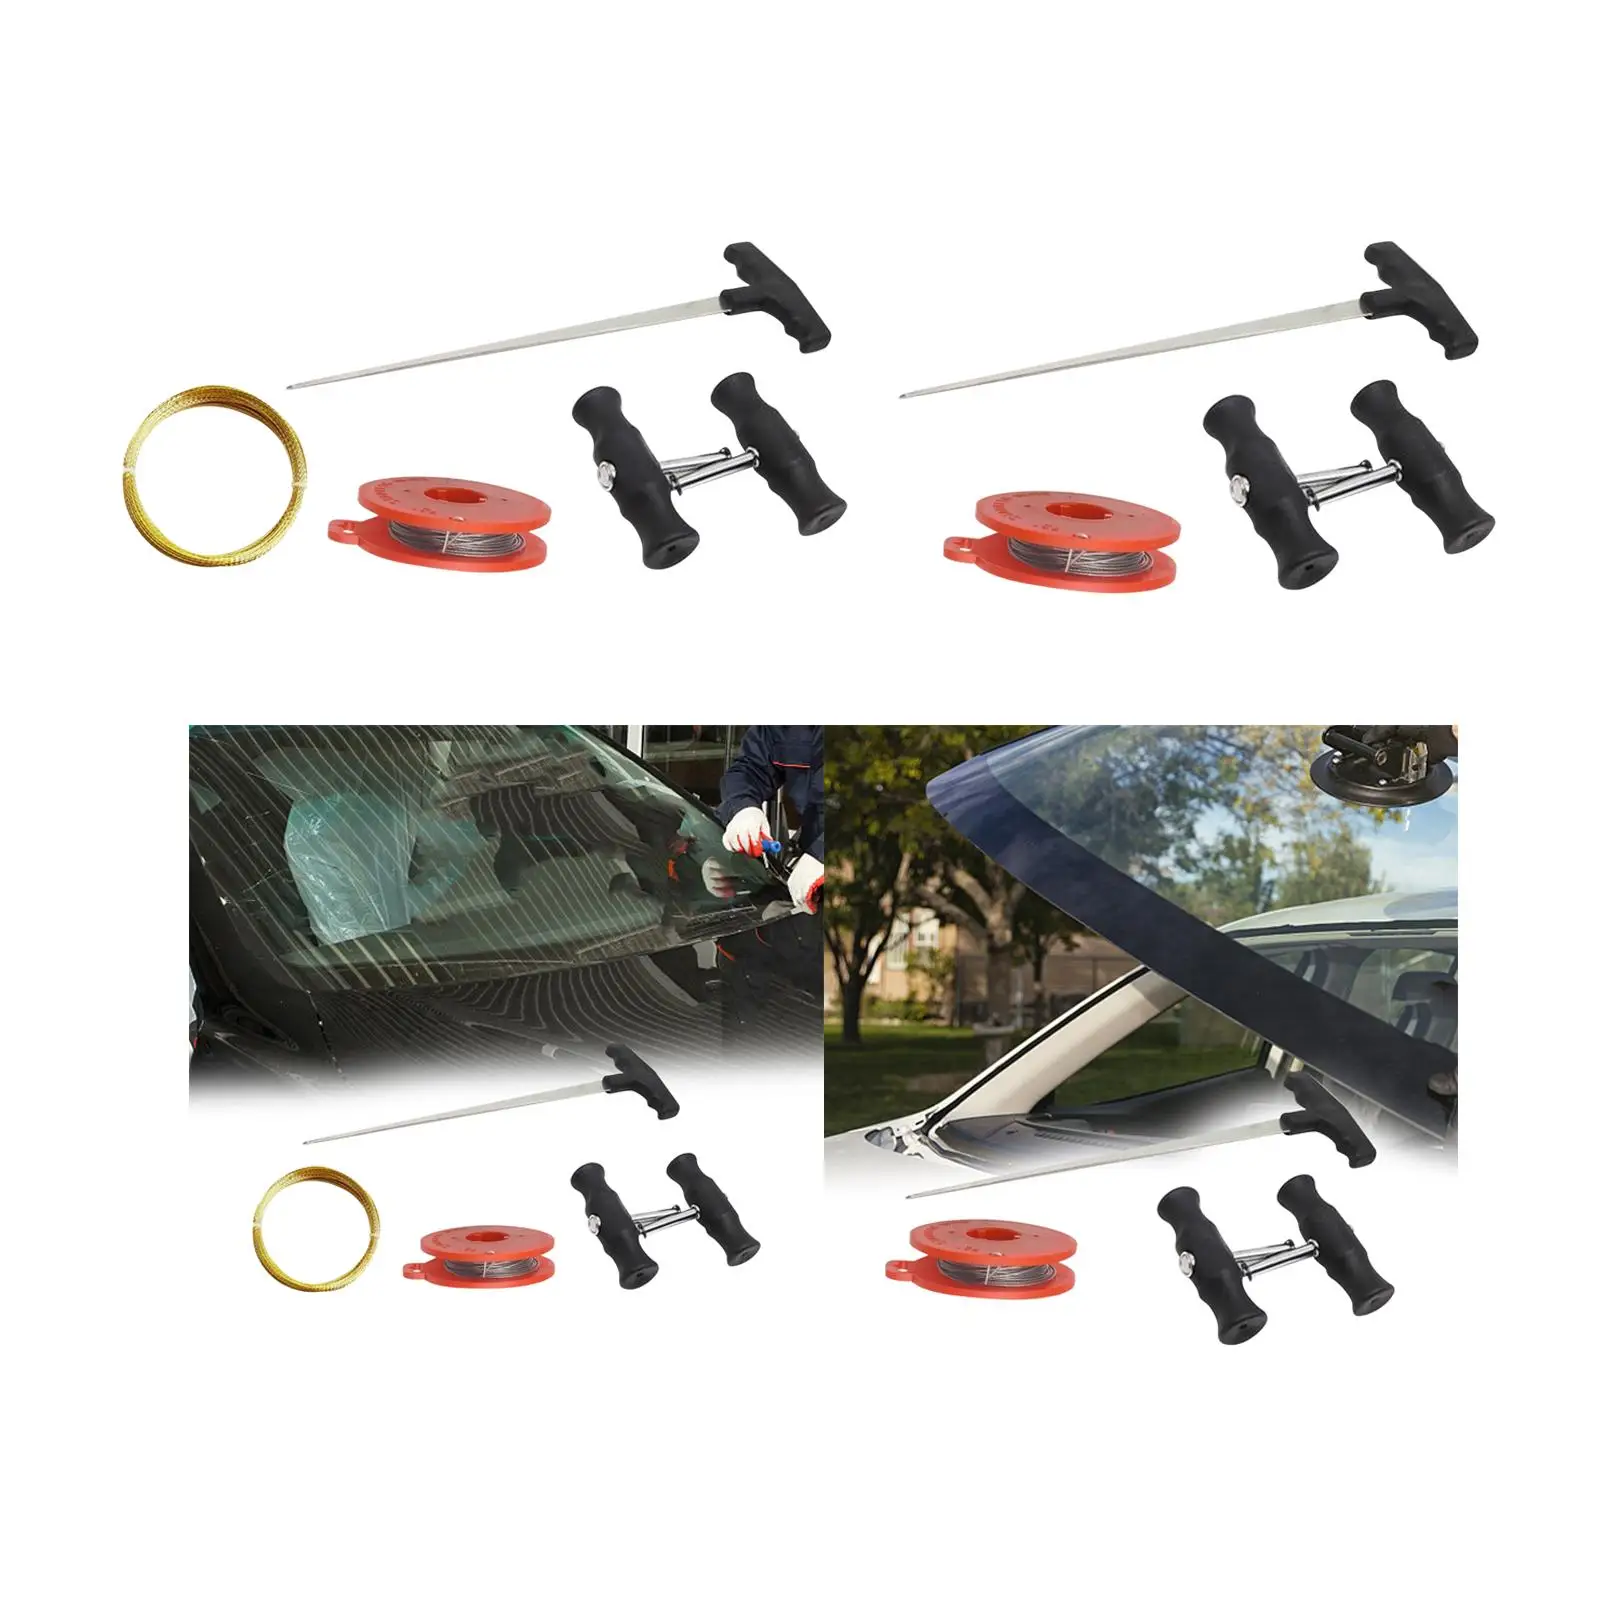 Car Windshield Removal Tools Set Compact with Steel Wire Quality Comfortable Grip Automotive Wind Glass Remover Universal